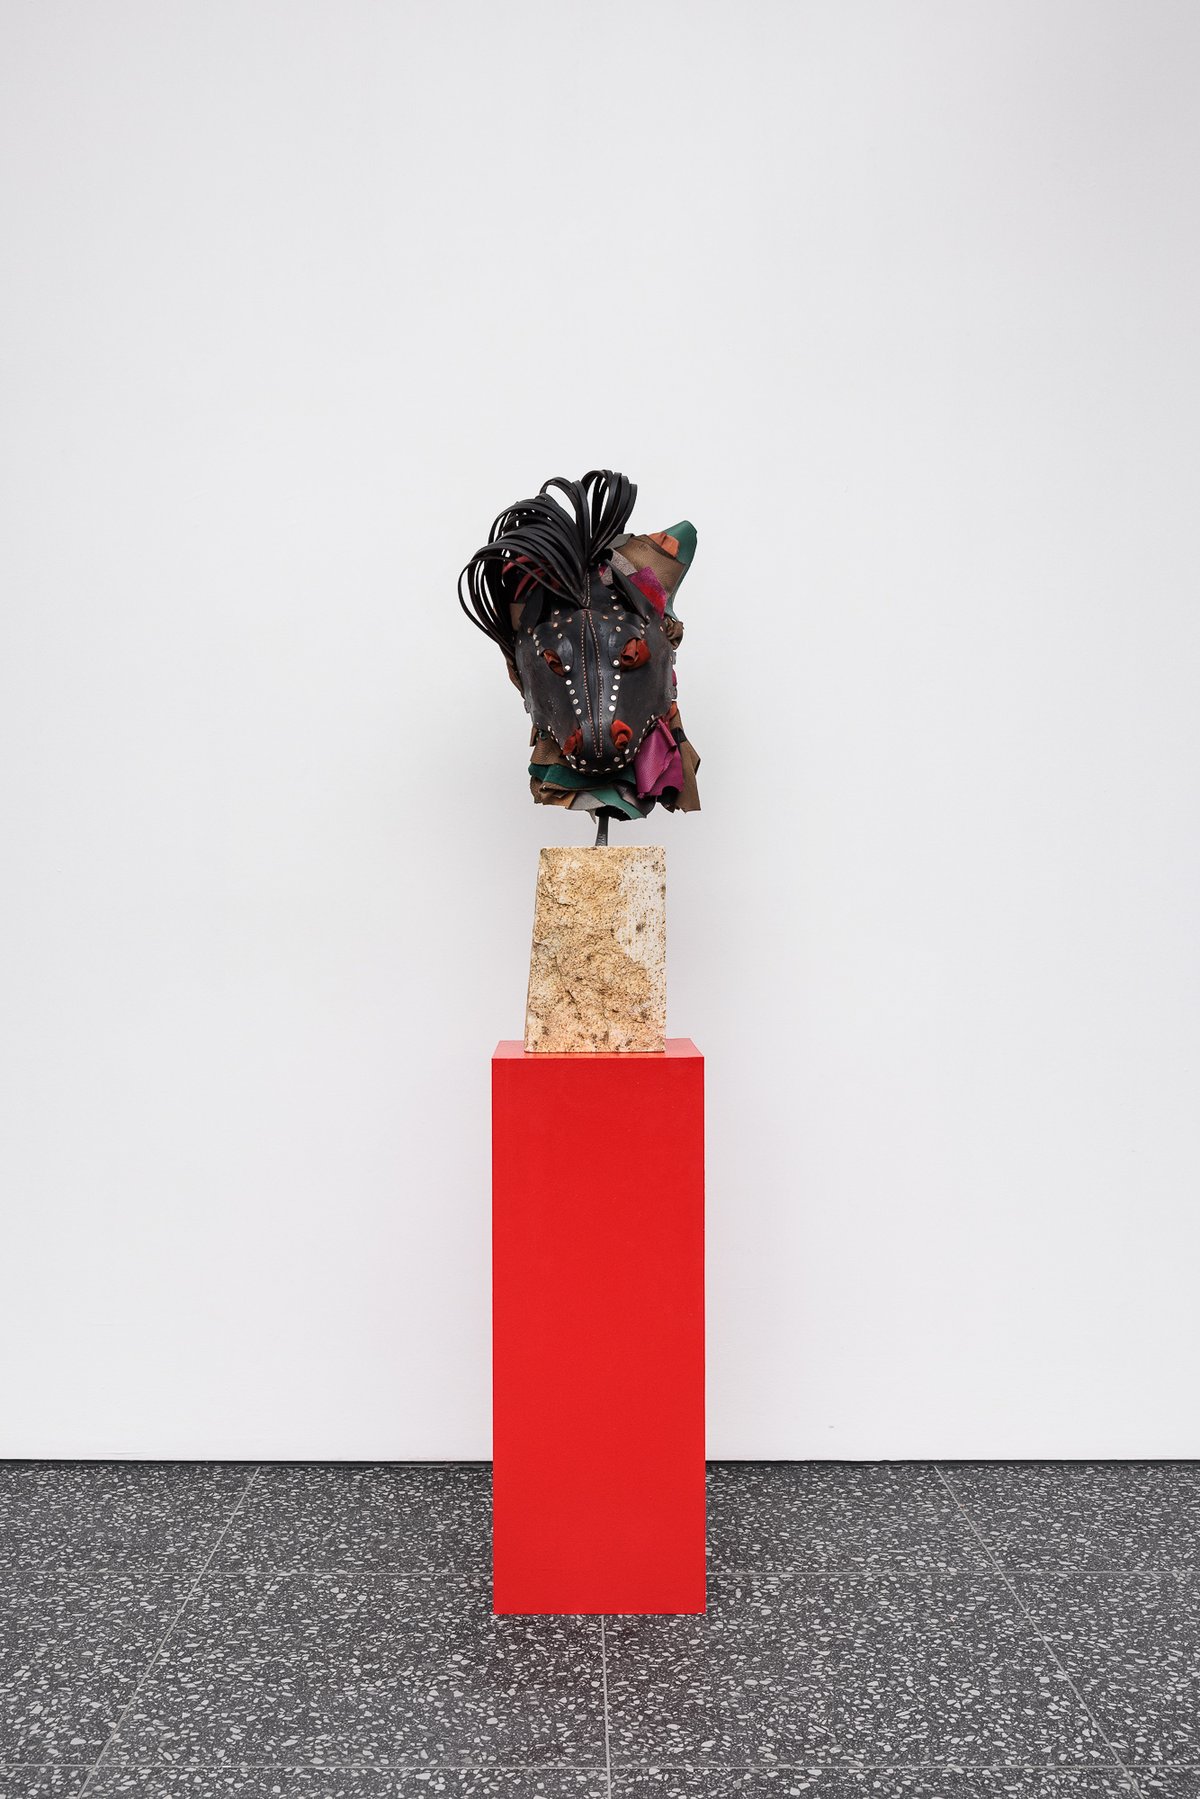 Lena HenkeMemory of a Young Sculpture XO, 2024Soldered and boiled leather, pigment and steel mounted on Austrian granite, on wooden pedestal30 x 30 x 167 cm (installed dimensions)30 x 30 x 79 cm (plinth), 30 x 20 x 75 cm (stone), 35 x 30 x 58 cm (mask)